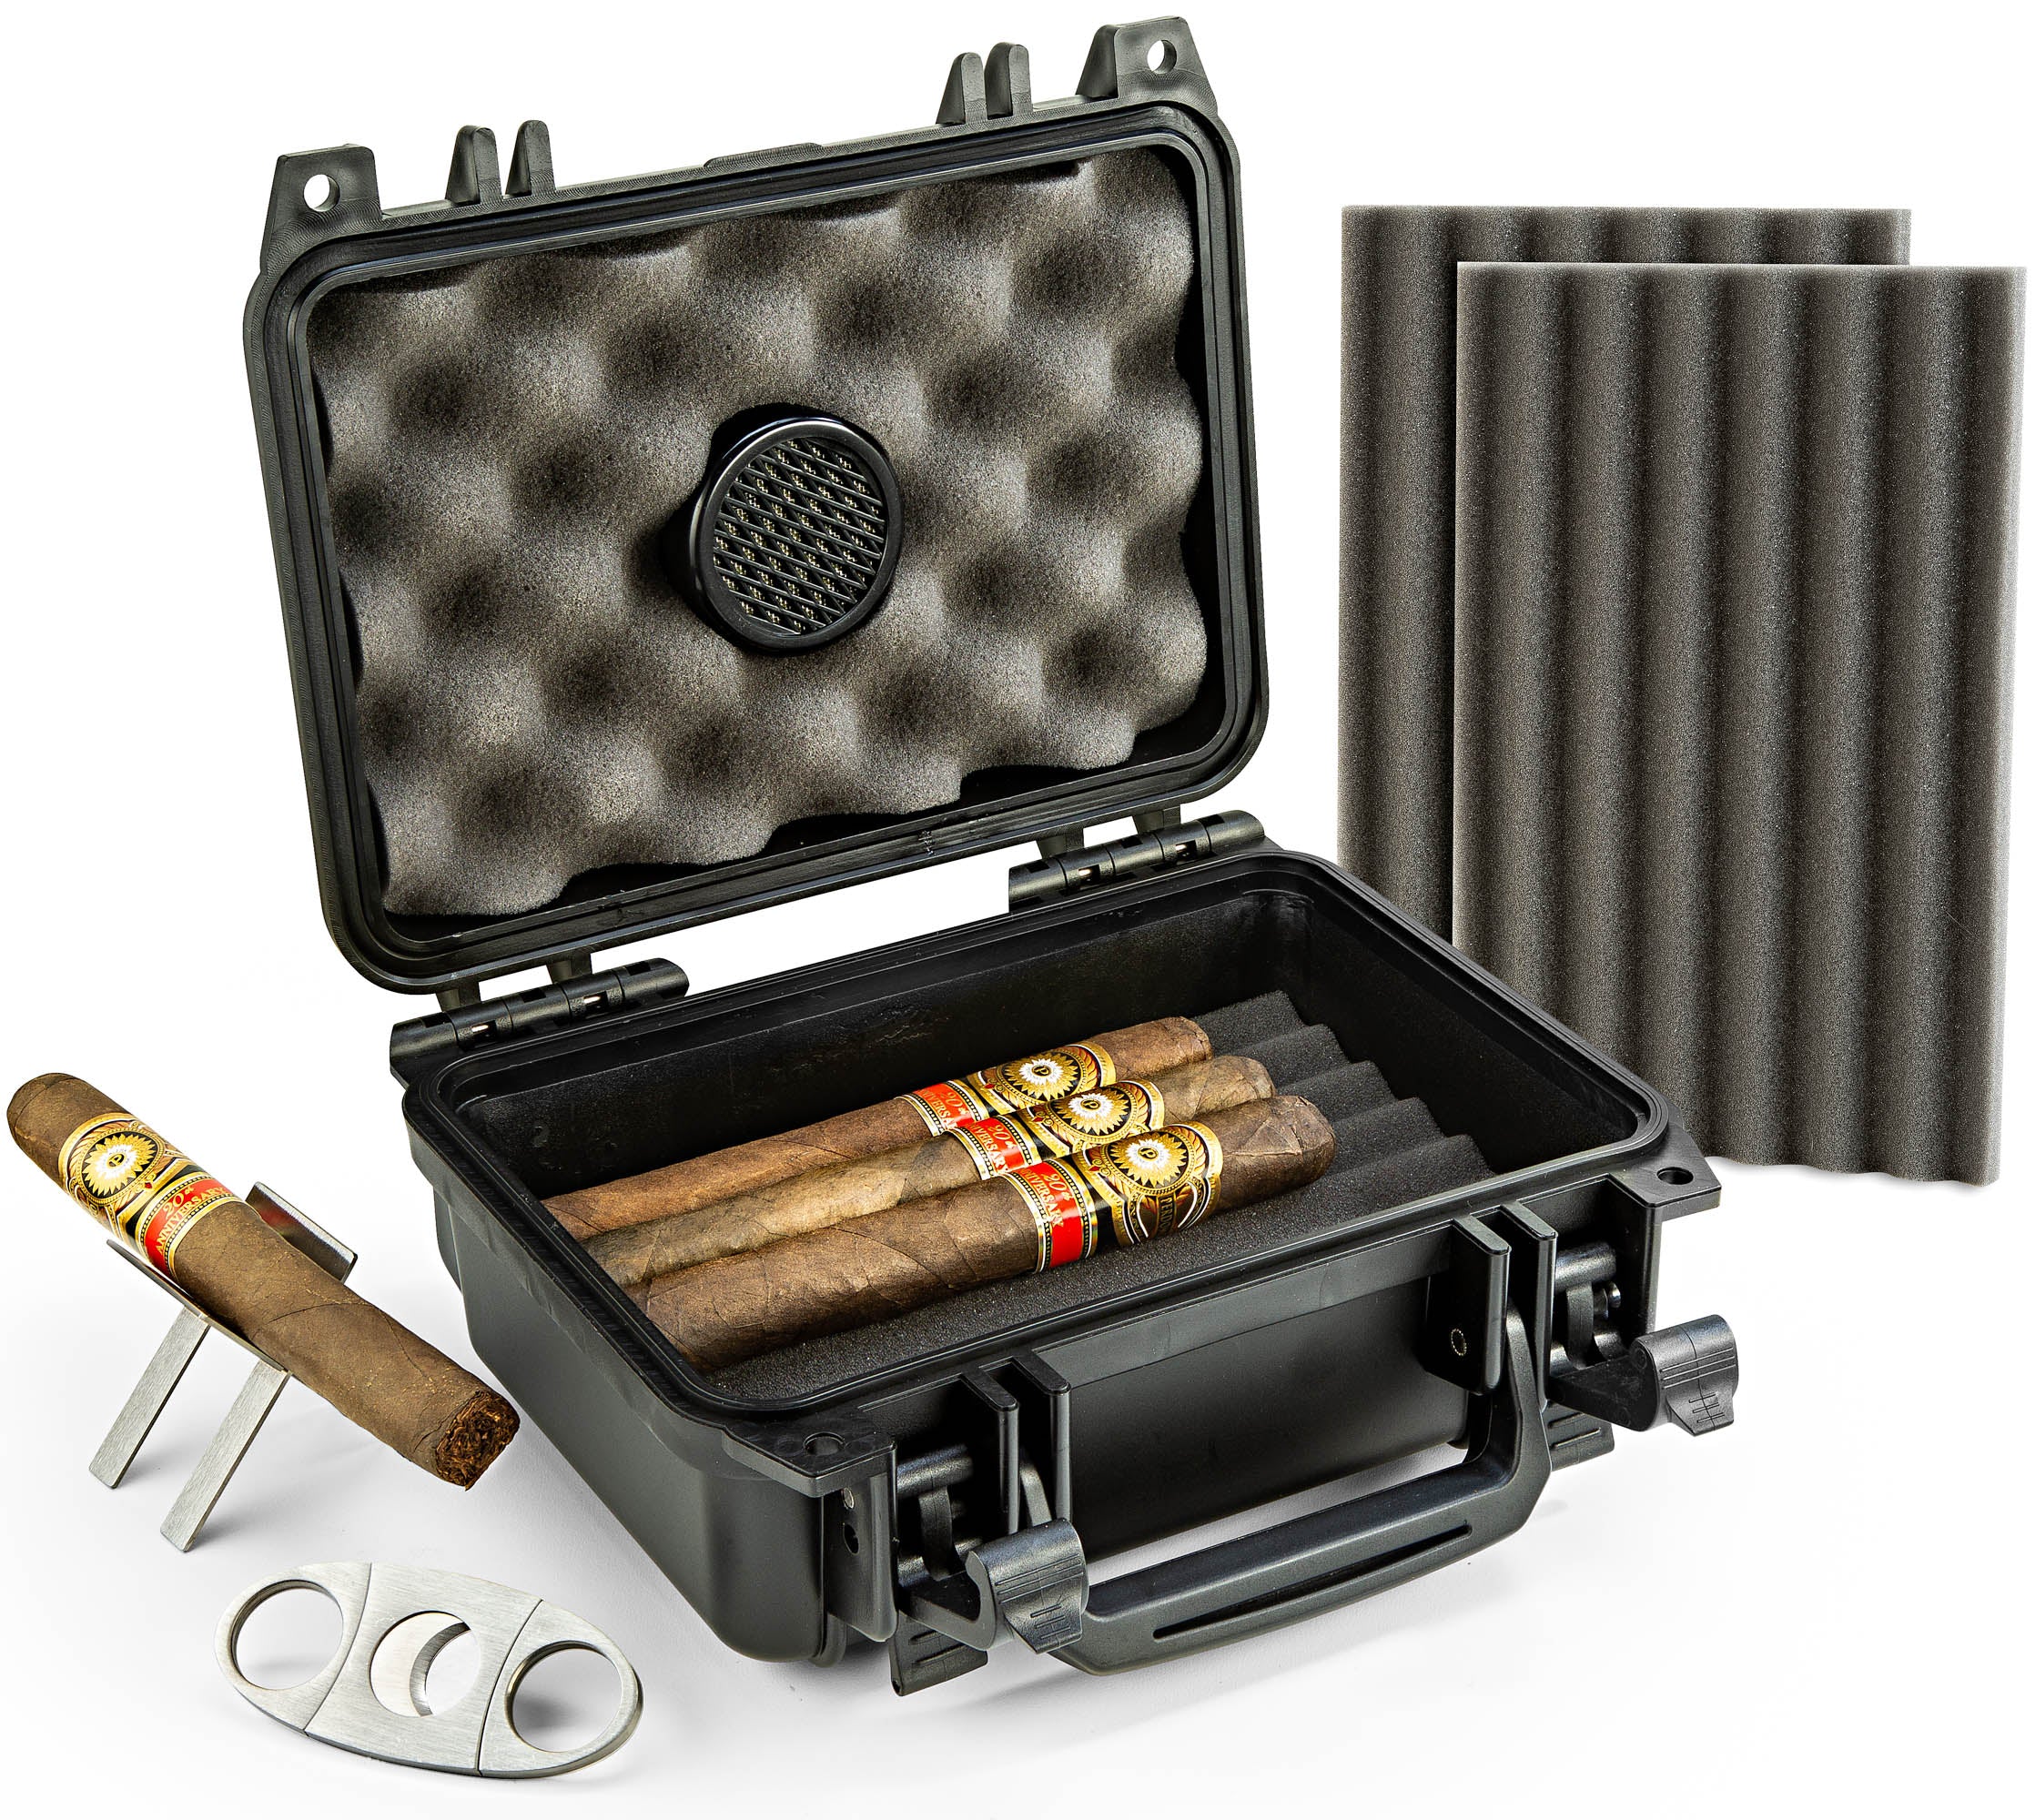 Waterproof Travel Cigar Humidor Case - Holds up to 20 Cigars - with Accessories kit (Includes Cigar Cutter & Collapsible Cigar Stand)